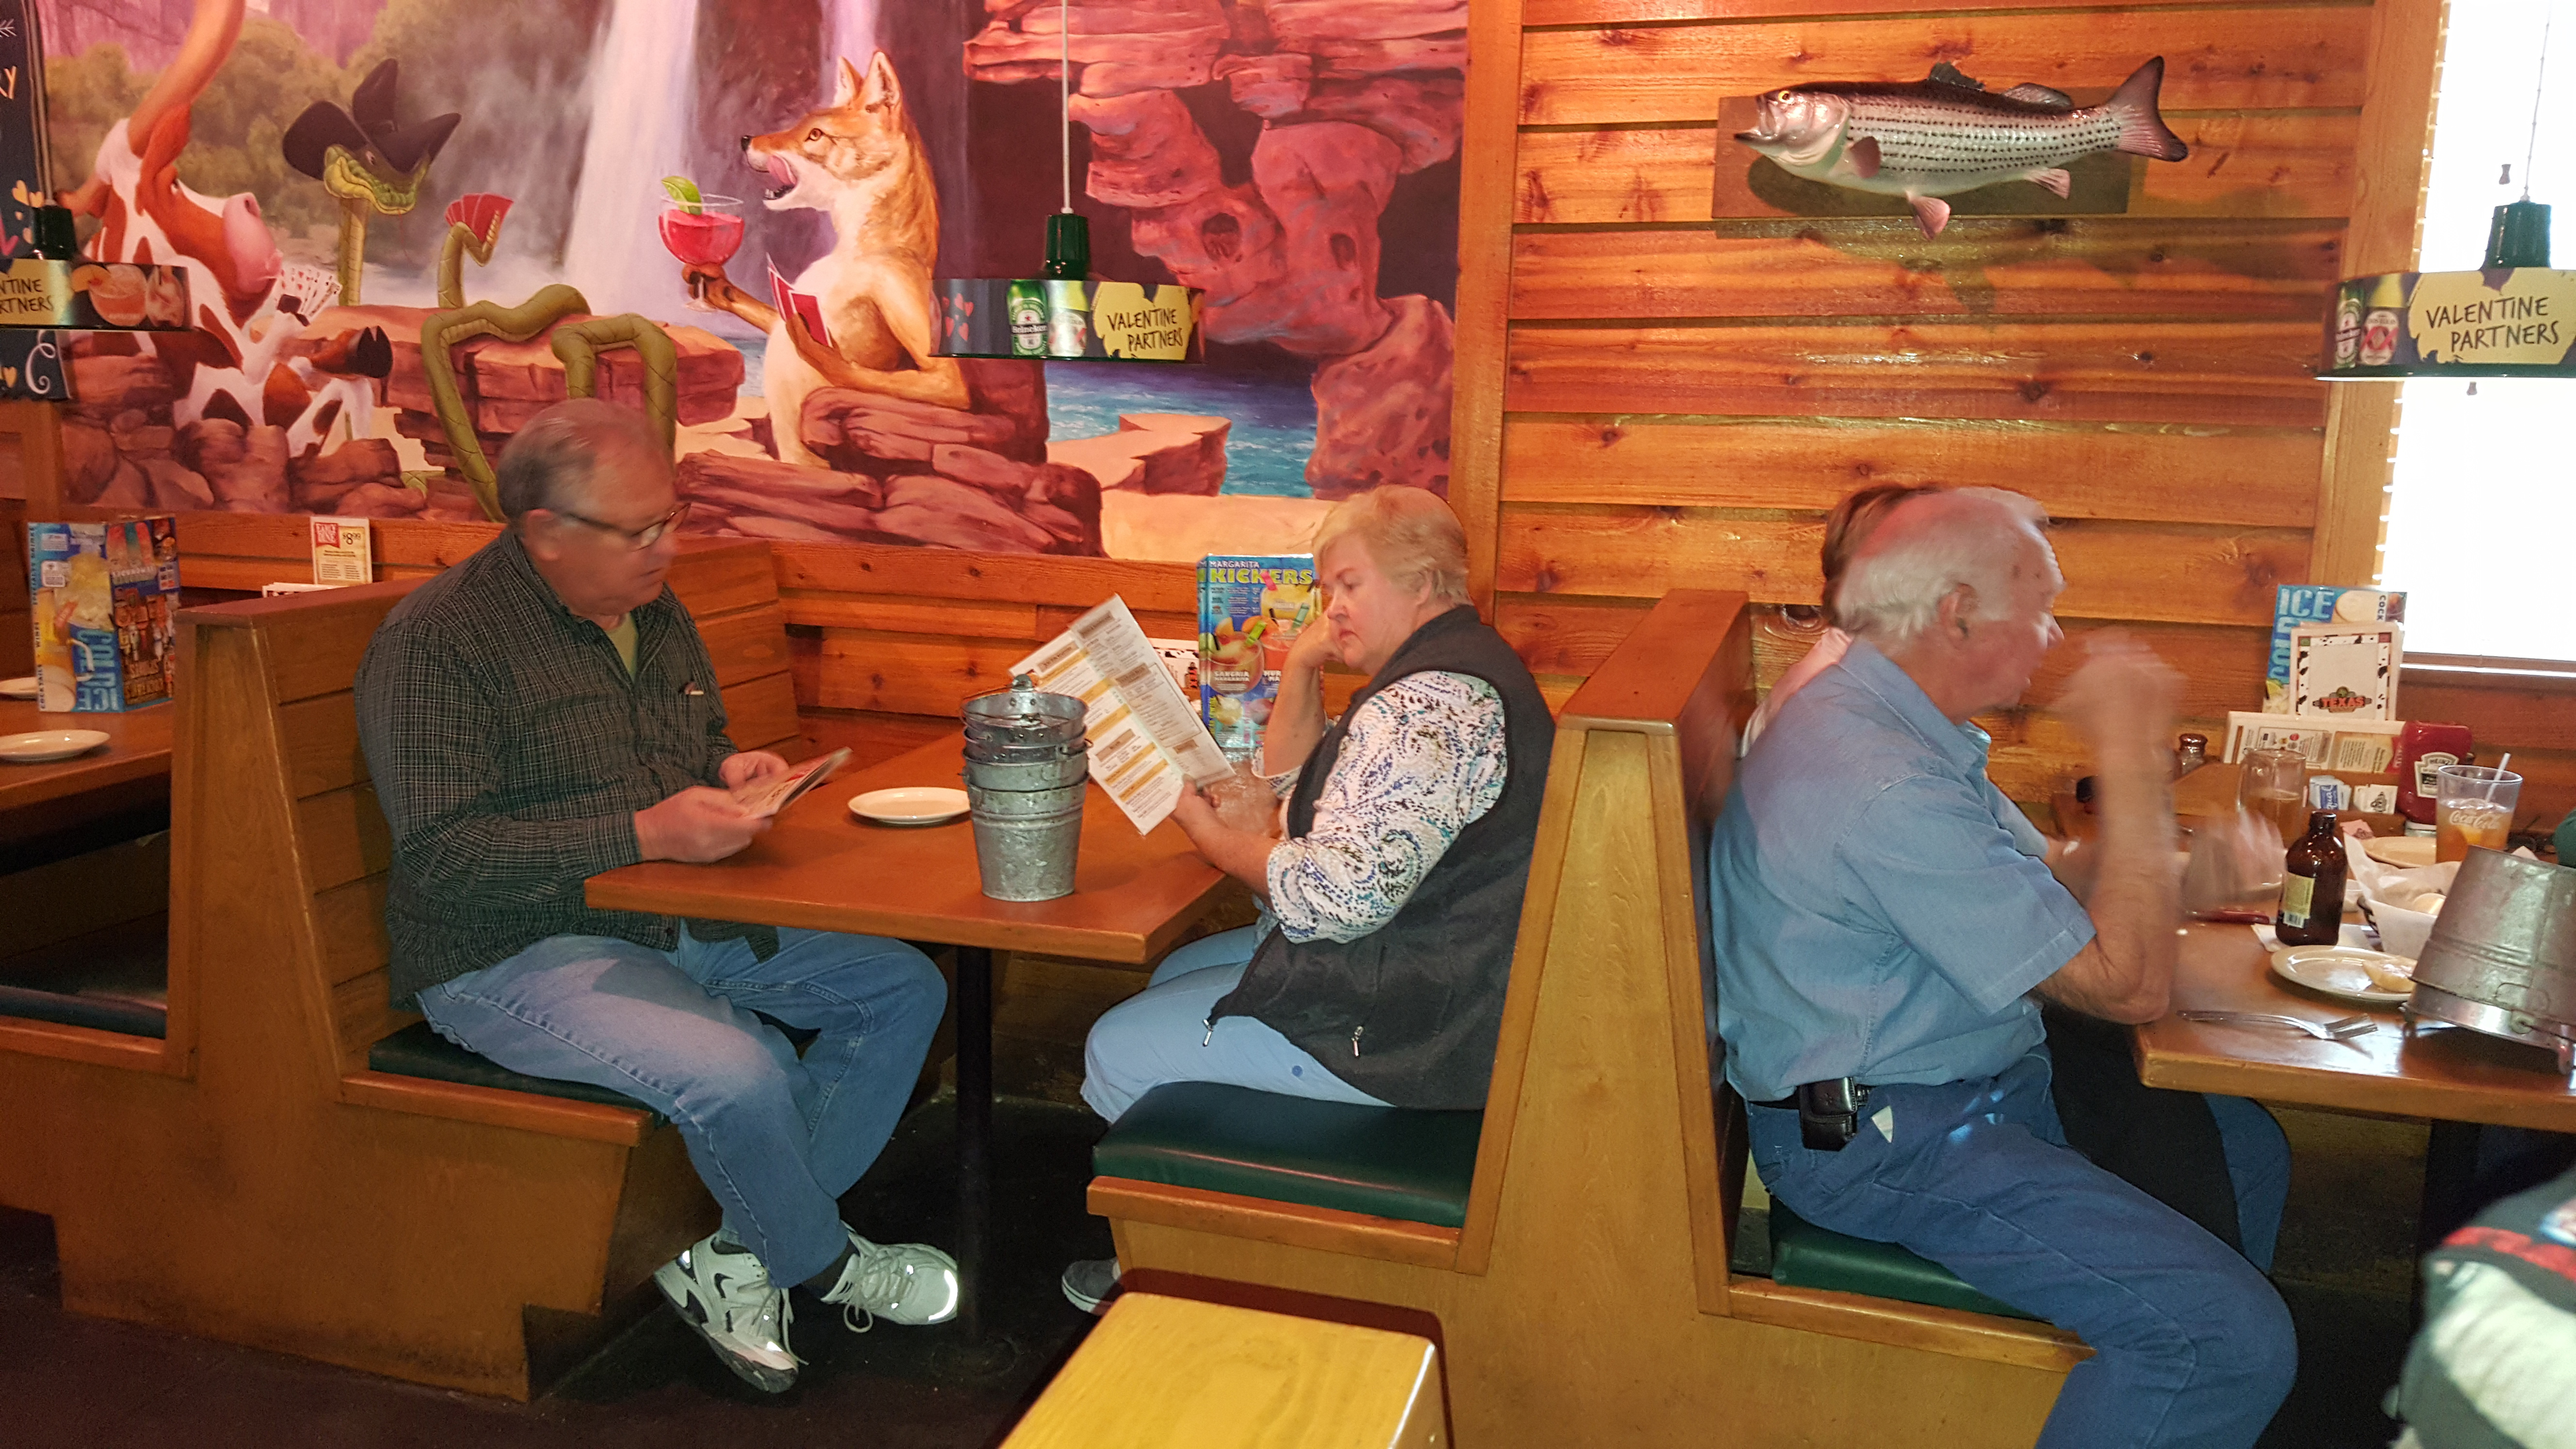 Friday lunch at Texas Roadhouse, Tucson